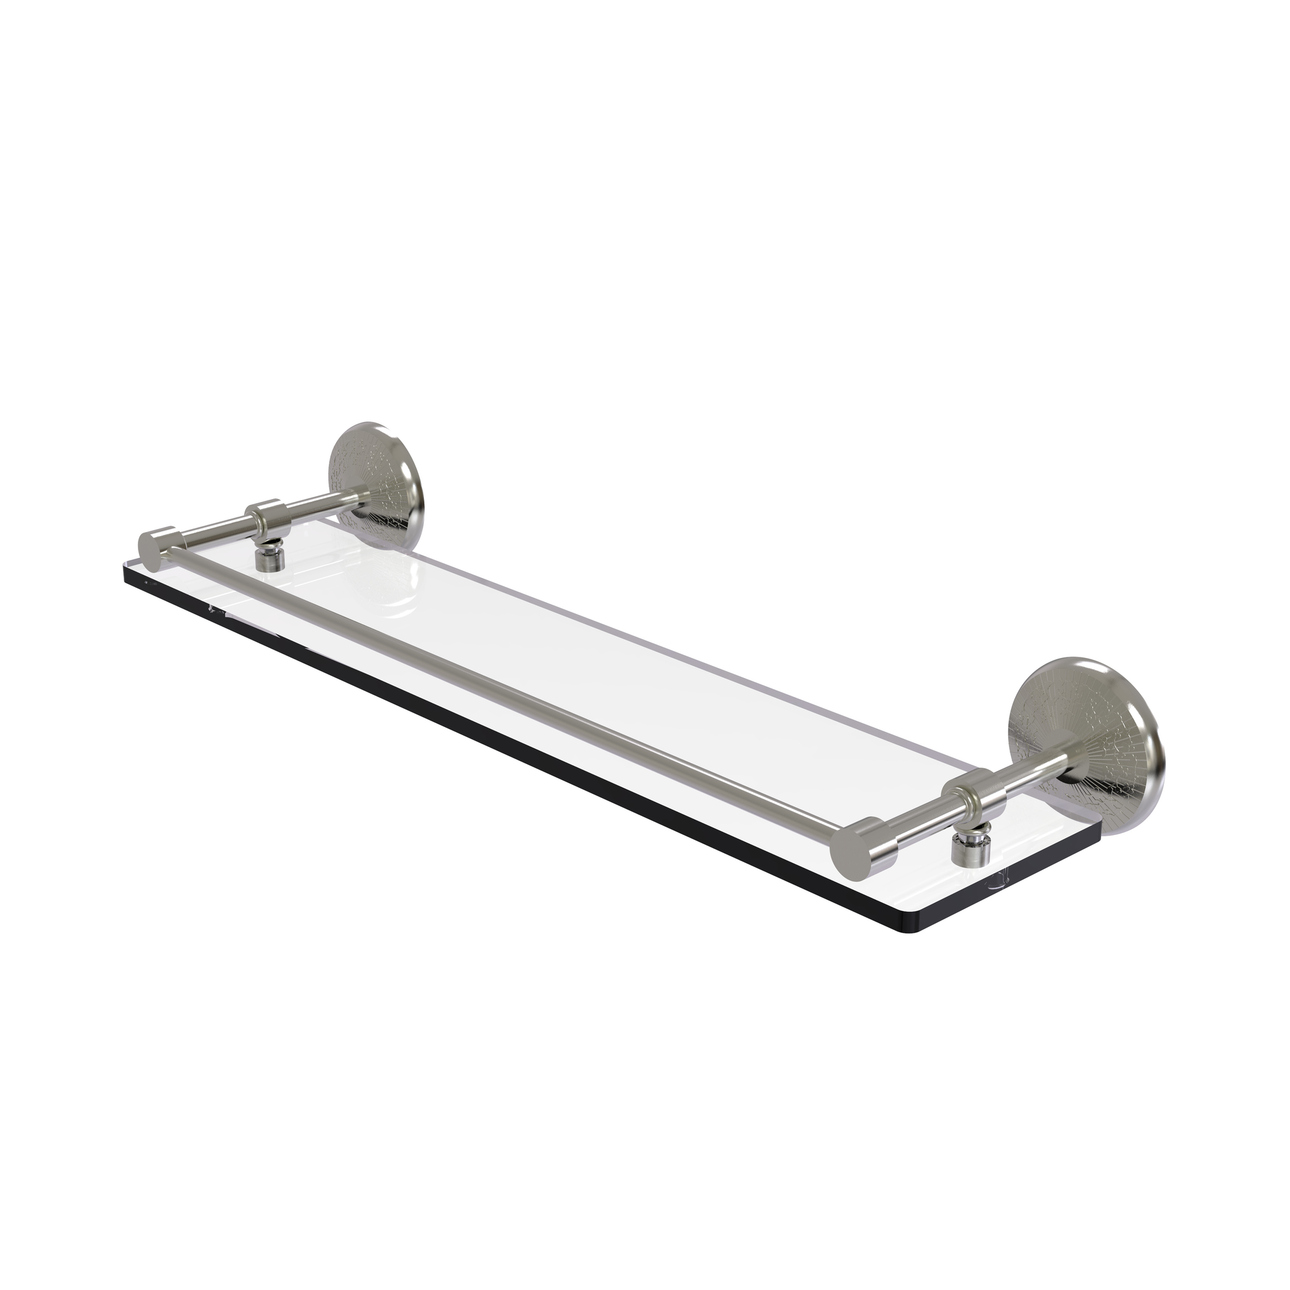 Monte Carlo Collection Tempered Glass Shelf with Gallery Rail - Satin Nickel / 22 Inch - image 1 of 5